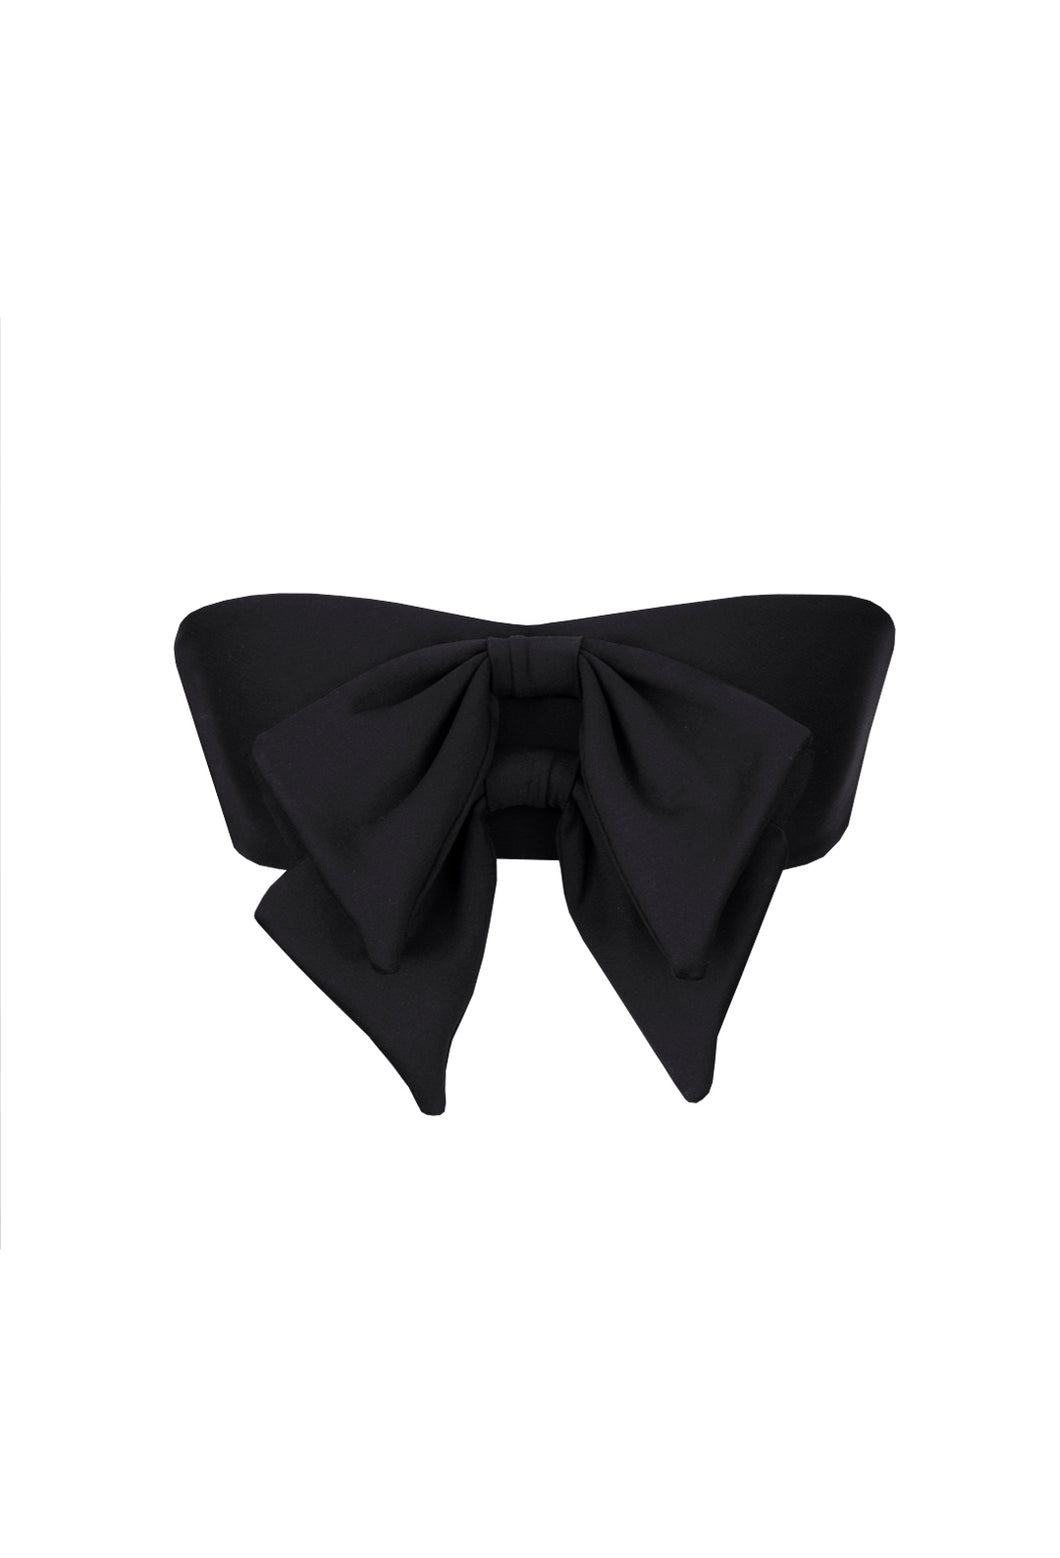 Duo Bow Bandeau Top - Black